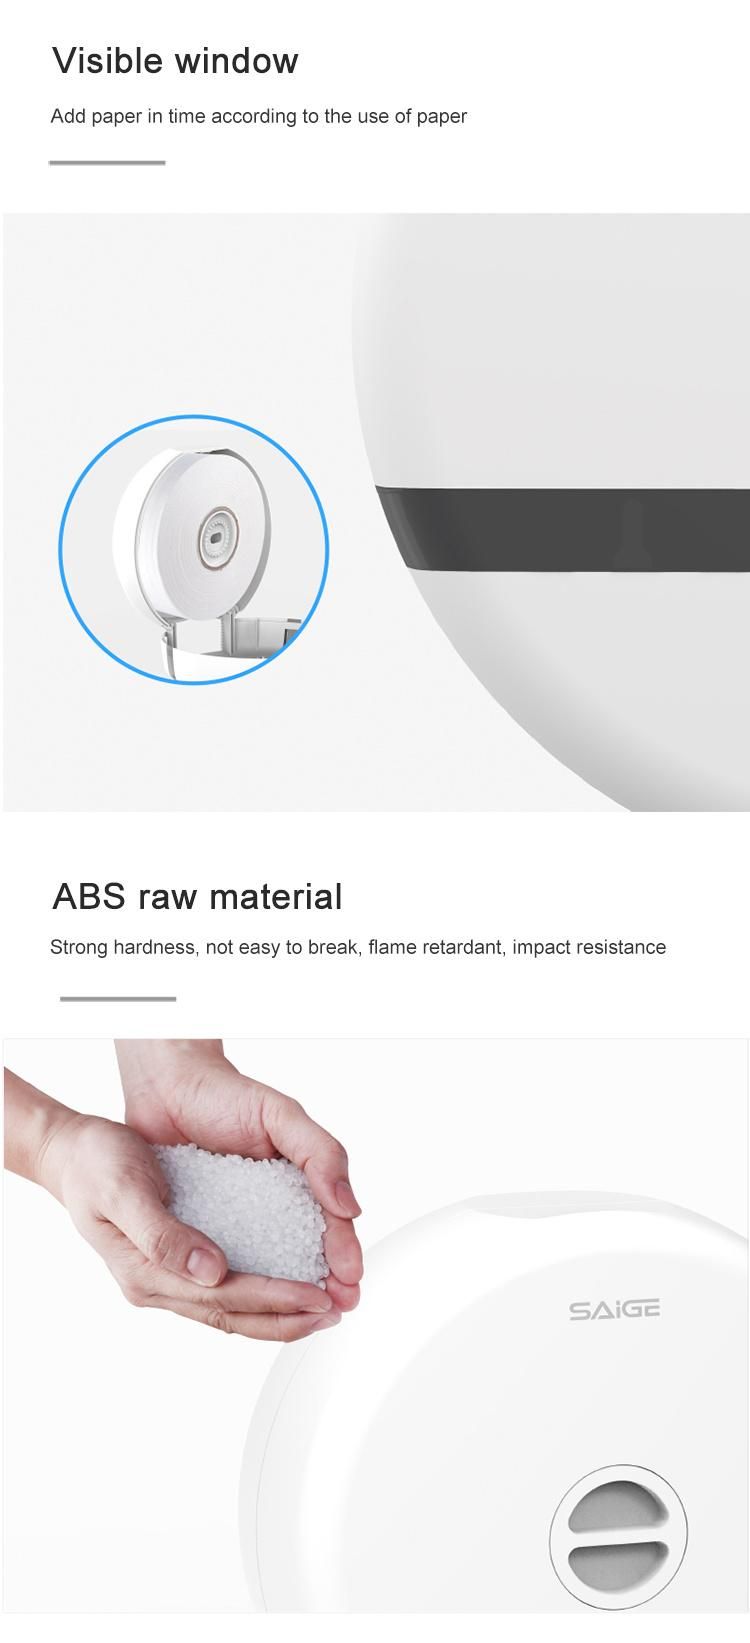 Saige Wholesale Wall Mounted High Quality ABS Plastic Jumbo Toilet Roll Holder